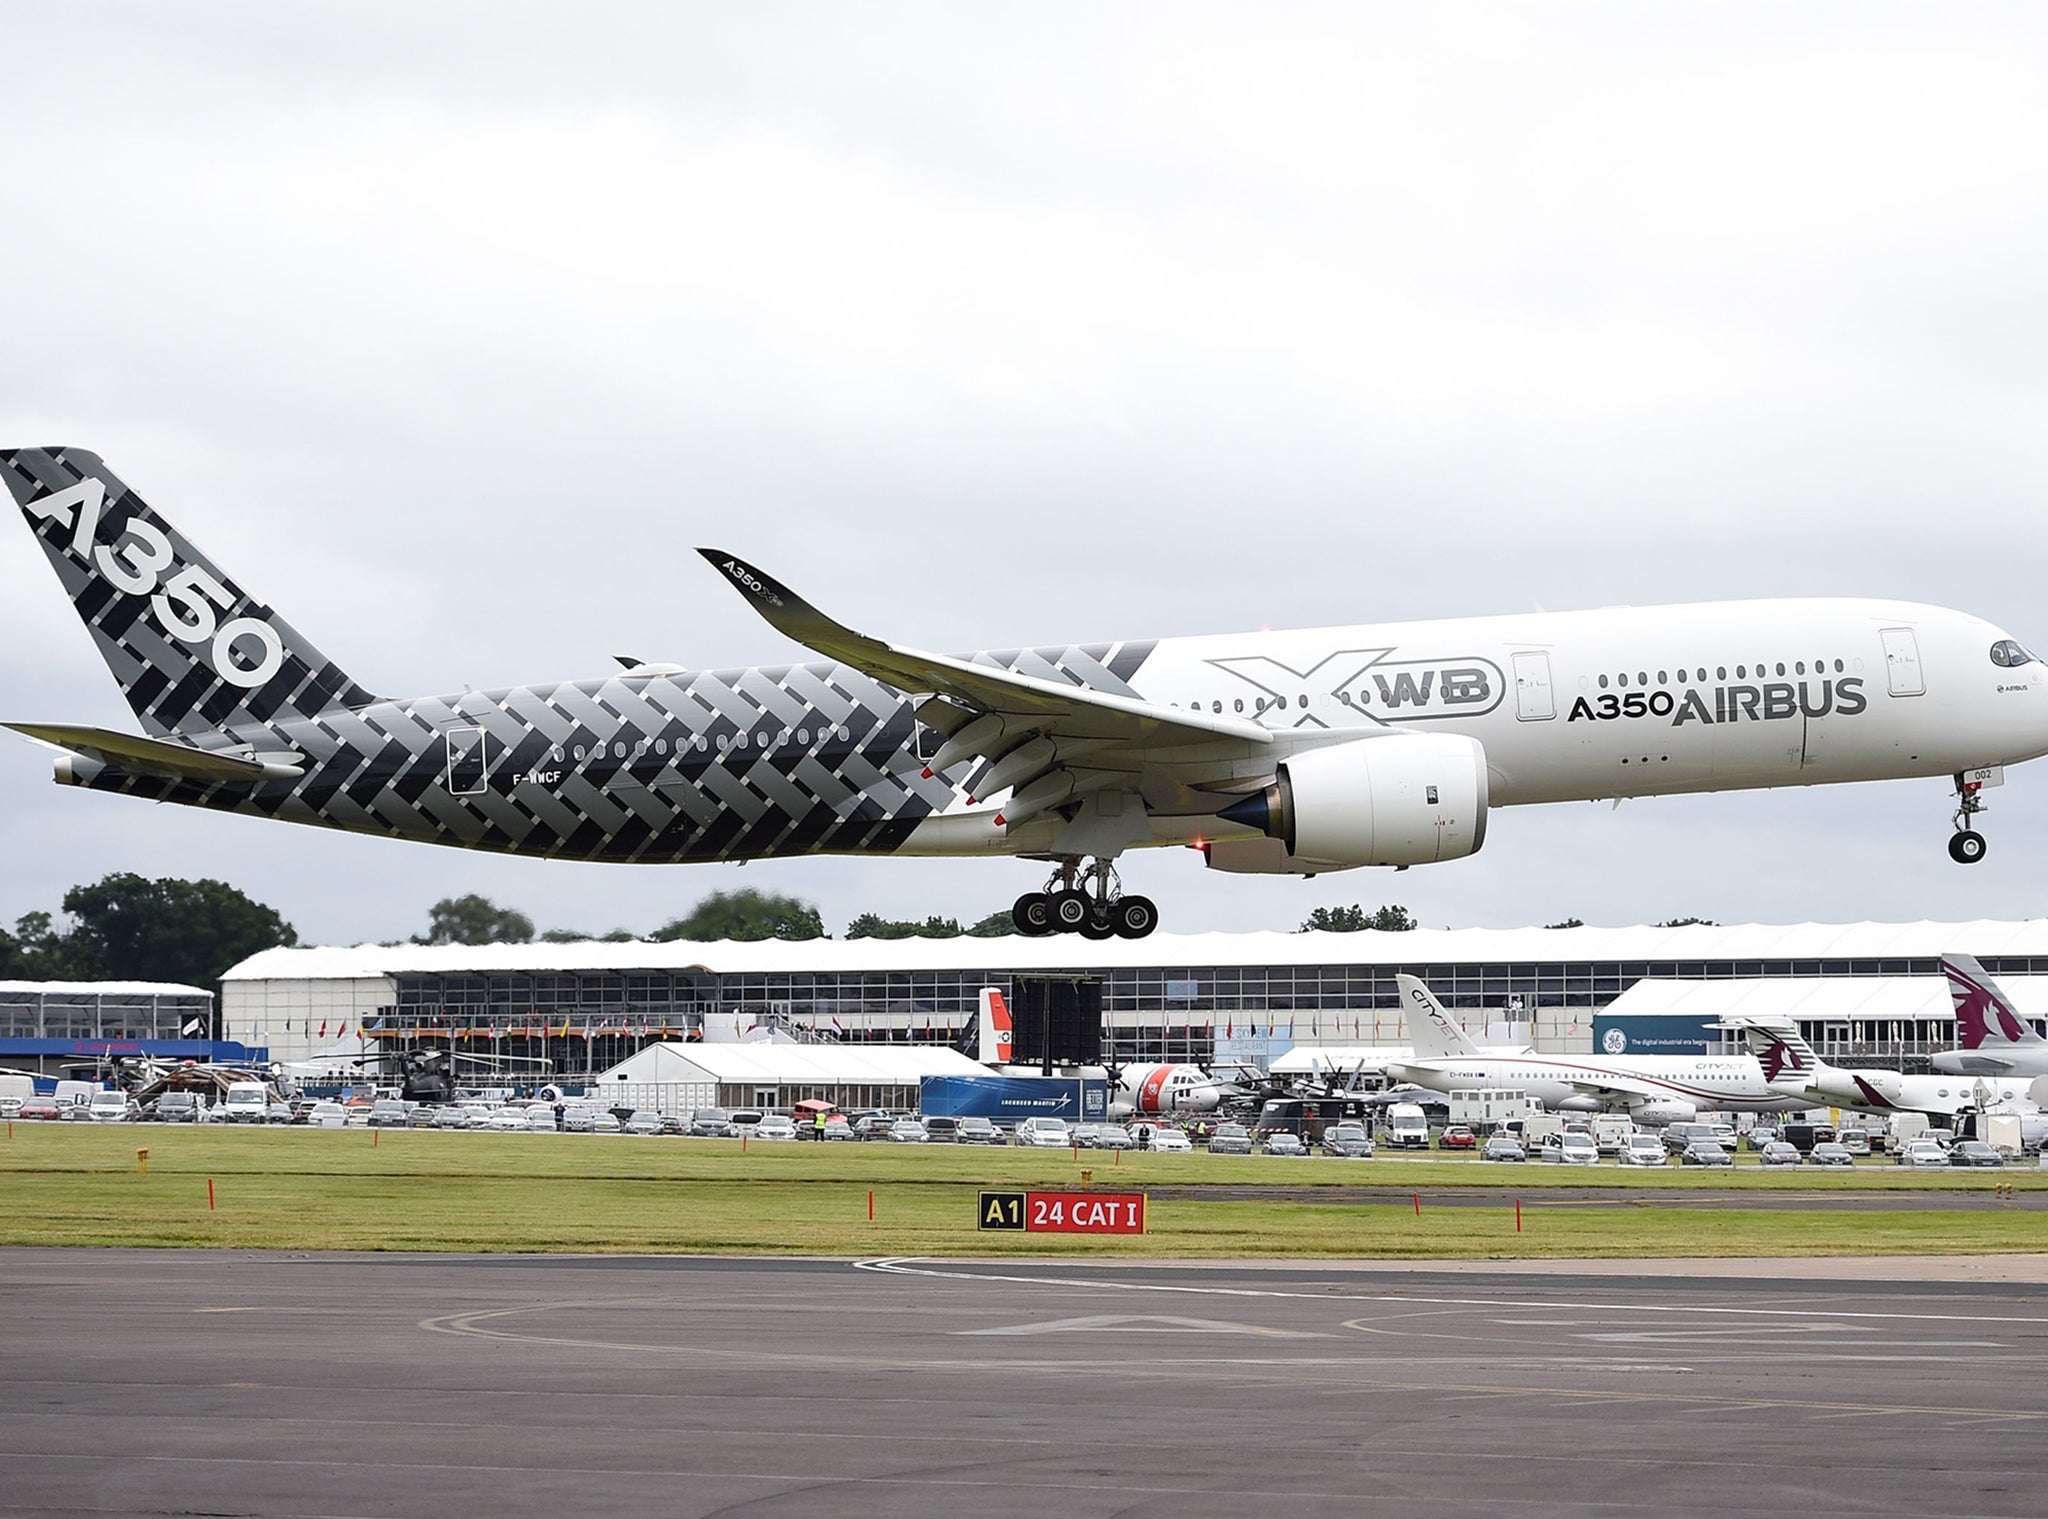 A new Airbus A350 carrying Sir Richard Branson lands at the Farnborough International Airshow in Hampshire.